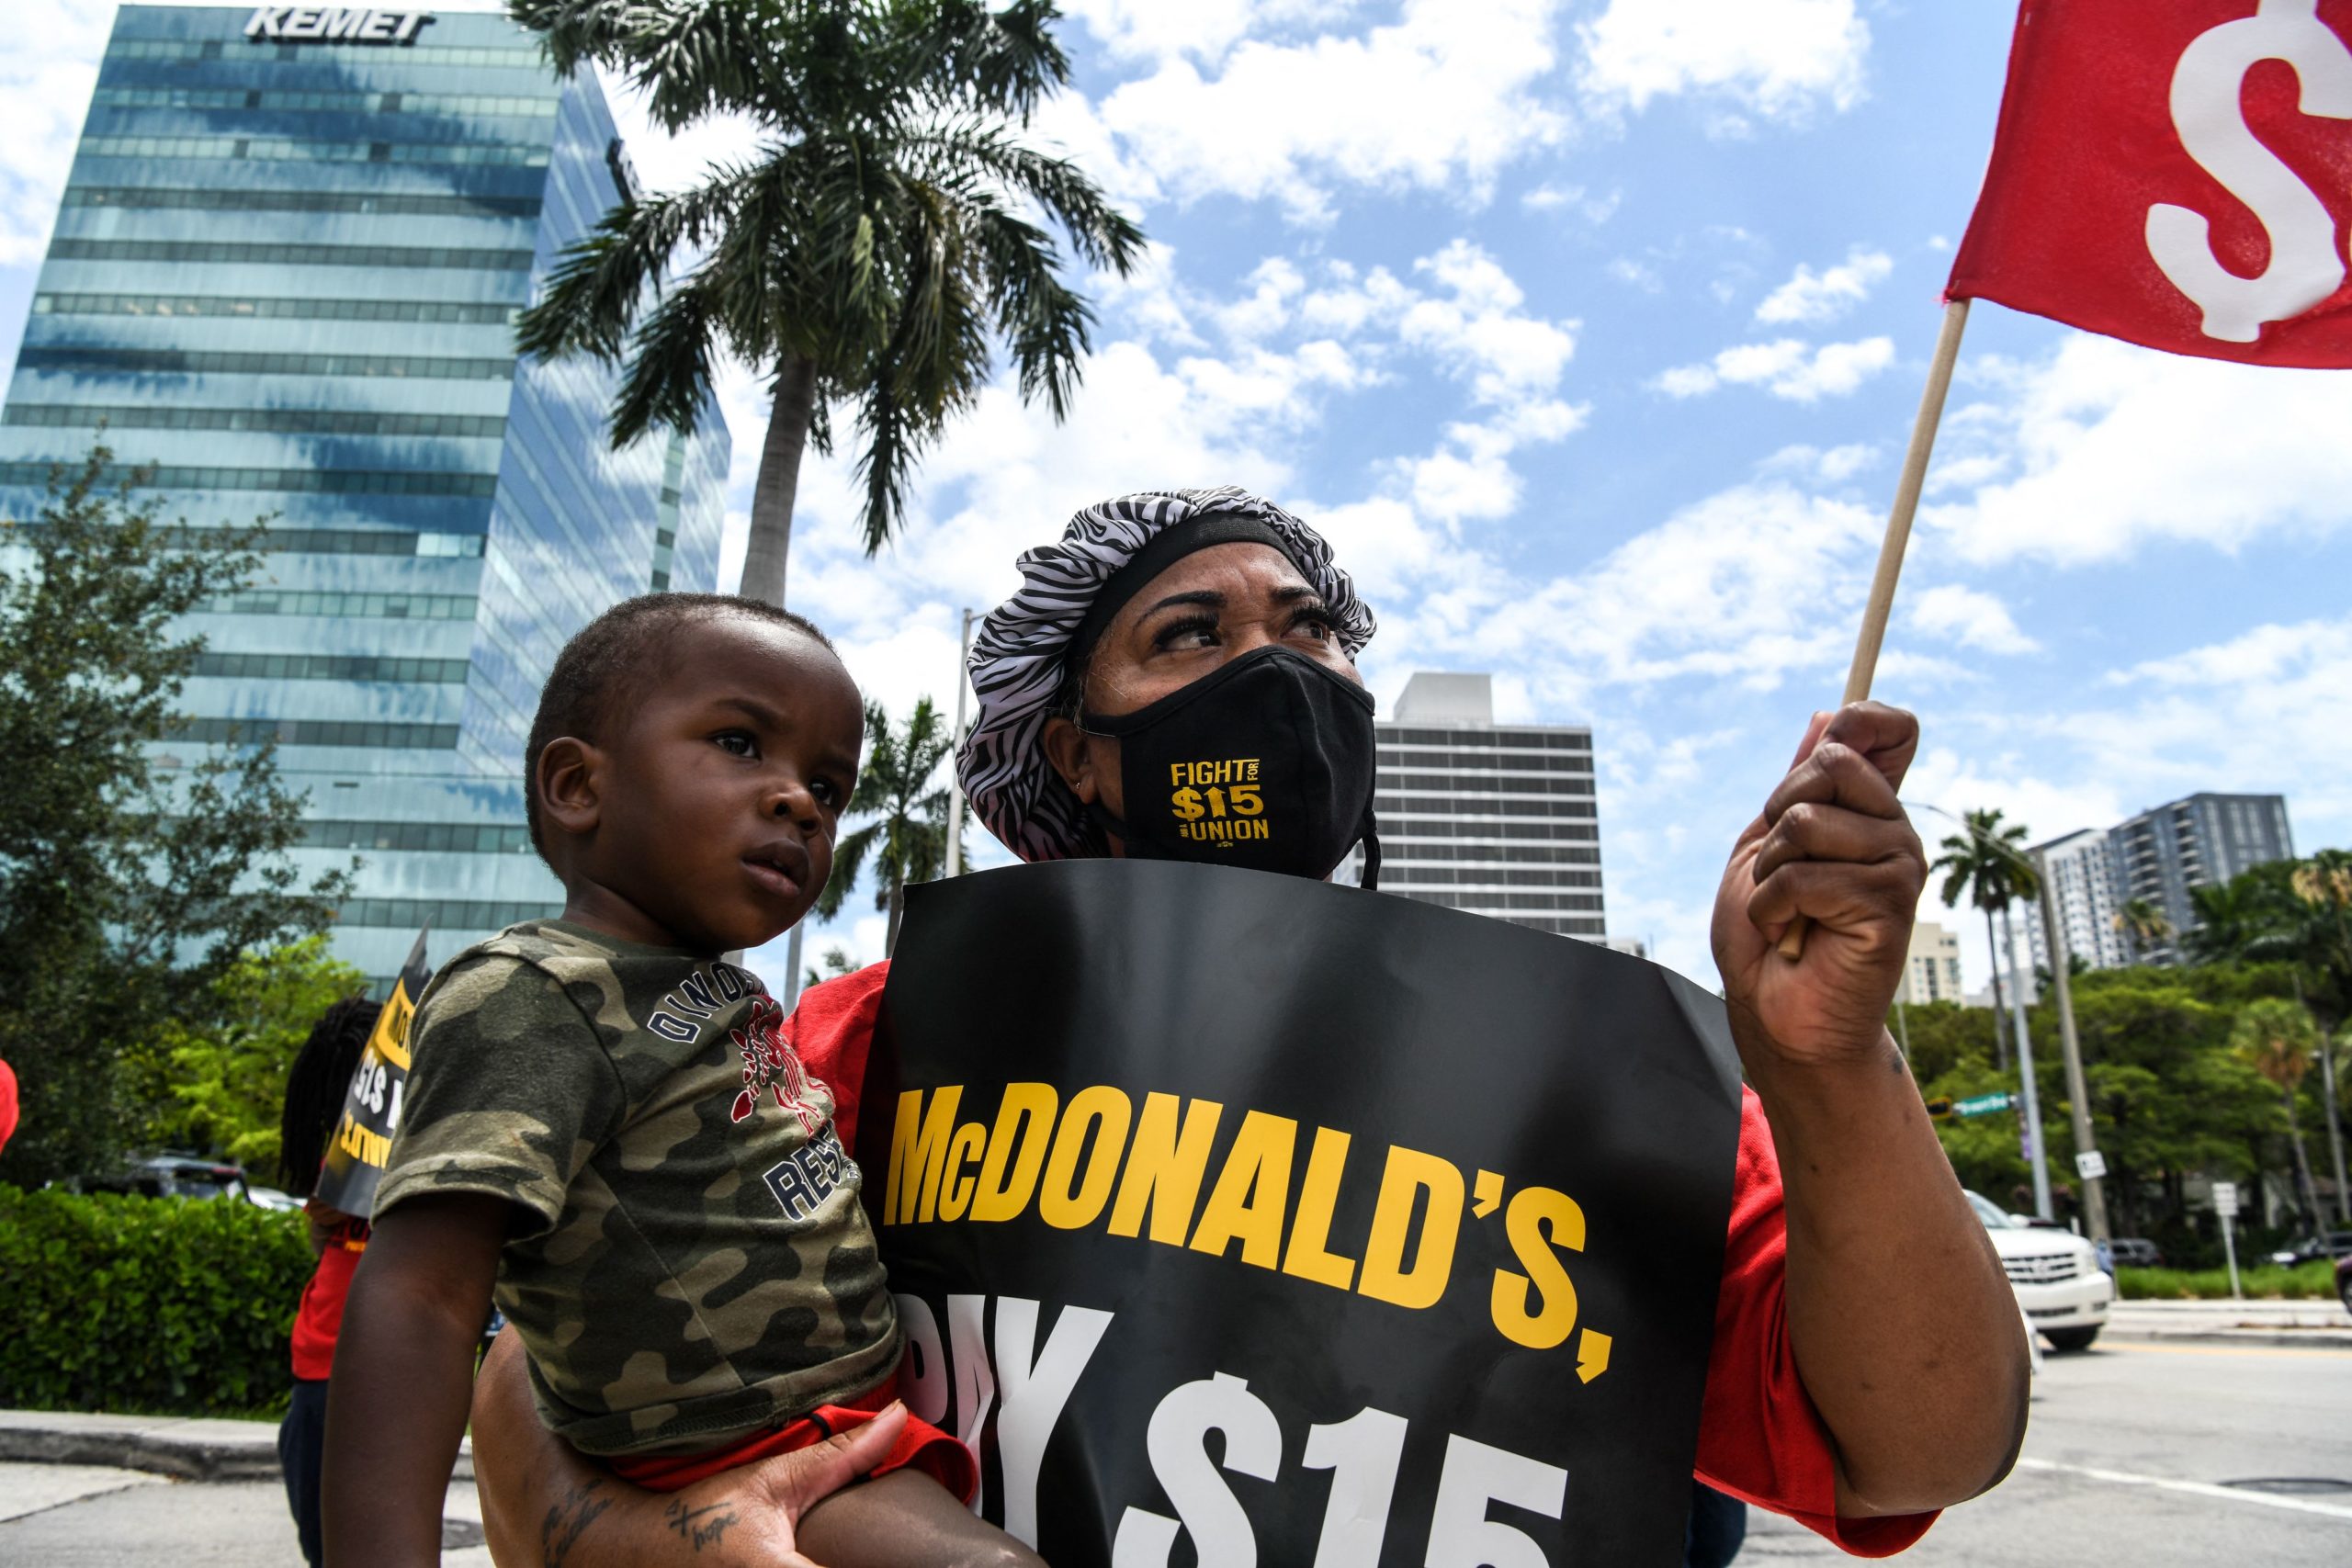 Deatrice Edie holds her grandson as she protests alongside employees of McDonald's outside a branch restaurant for a raise in their minimum wage to $15 an hour, in Fort Lauderdale on May 19, 2021. - South Floridian Deatrice Edie keeps her home's belongings packed and ready to go. She hasn't paid rent in several months and expects an imminent eviction. Deatrice works three jobs, one of which is at a Fort Lauderdale McDonald's, but despite the long hours and hard labor, the 41 year old struggles to sustain her family of seven. Today she joins her coworkers in demanding a higher minimum wage. (Photo by CHANDAN KHANNA / AFP) (Photo by CHANDAN KHANNA/AFP via Getty Images)